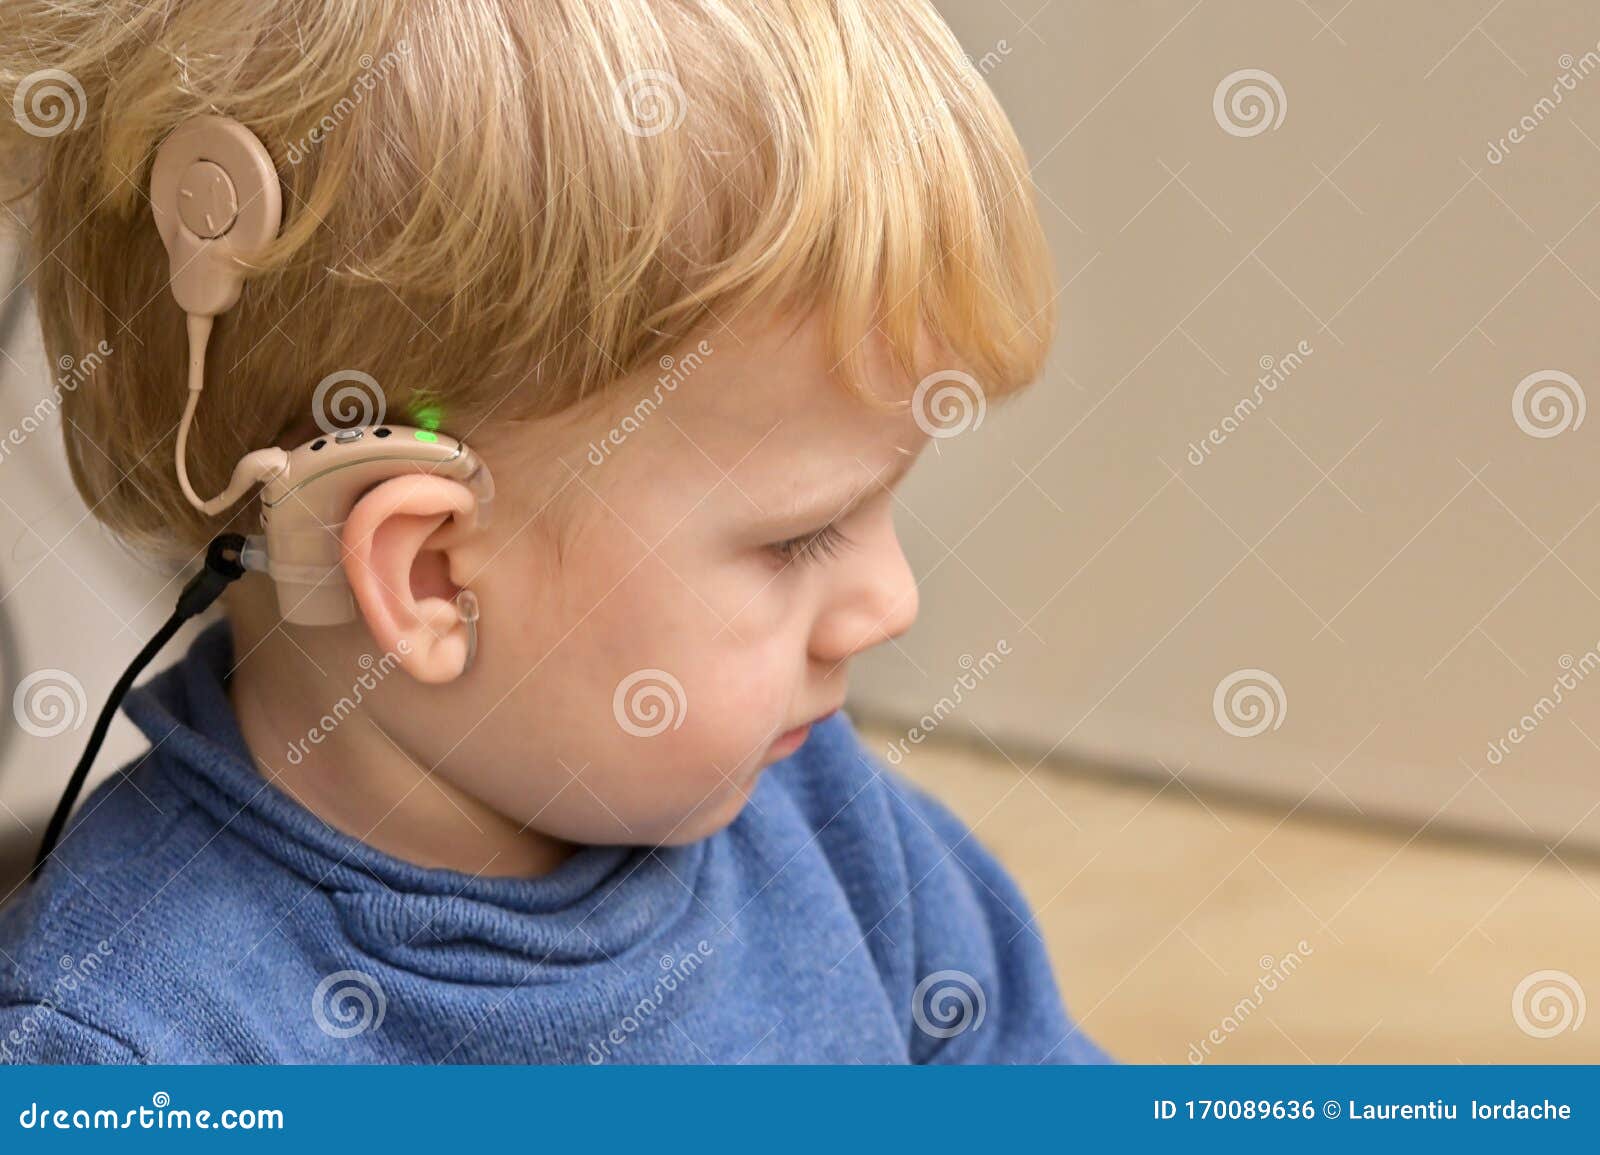 boy with a hearing aids and cochlear implants